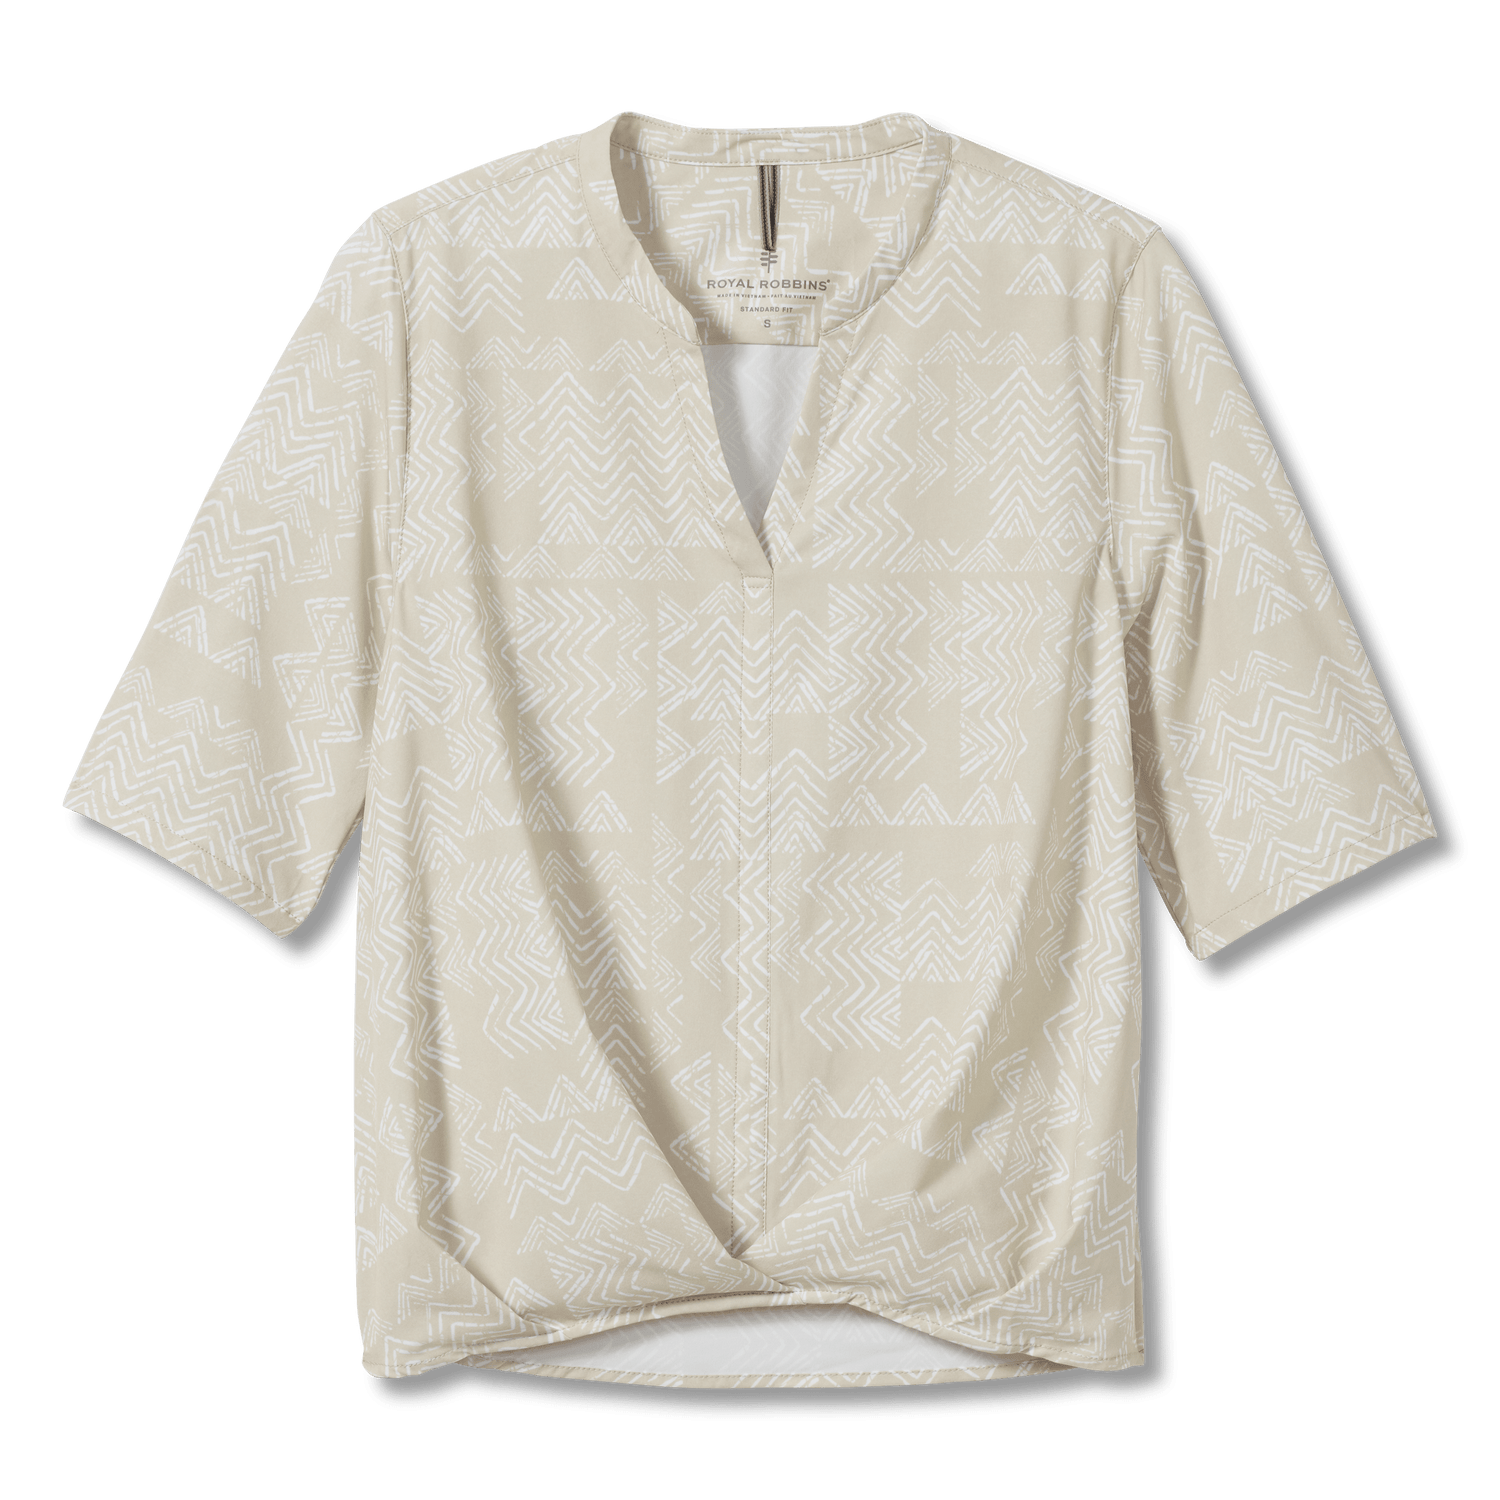 Royal Robbins - W's Spotless Traveler S/S - Recycled polyester - Weekendbee - sustainable sportswear